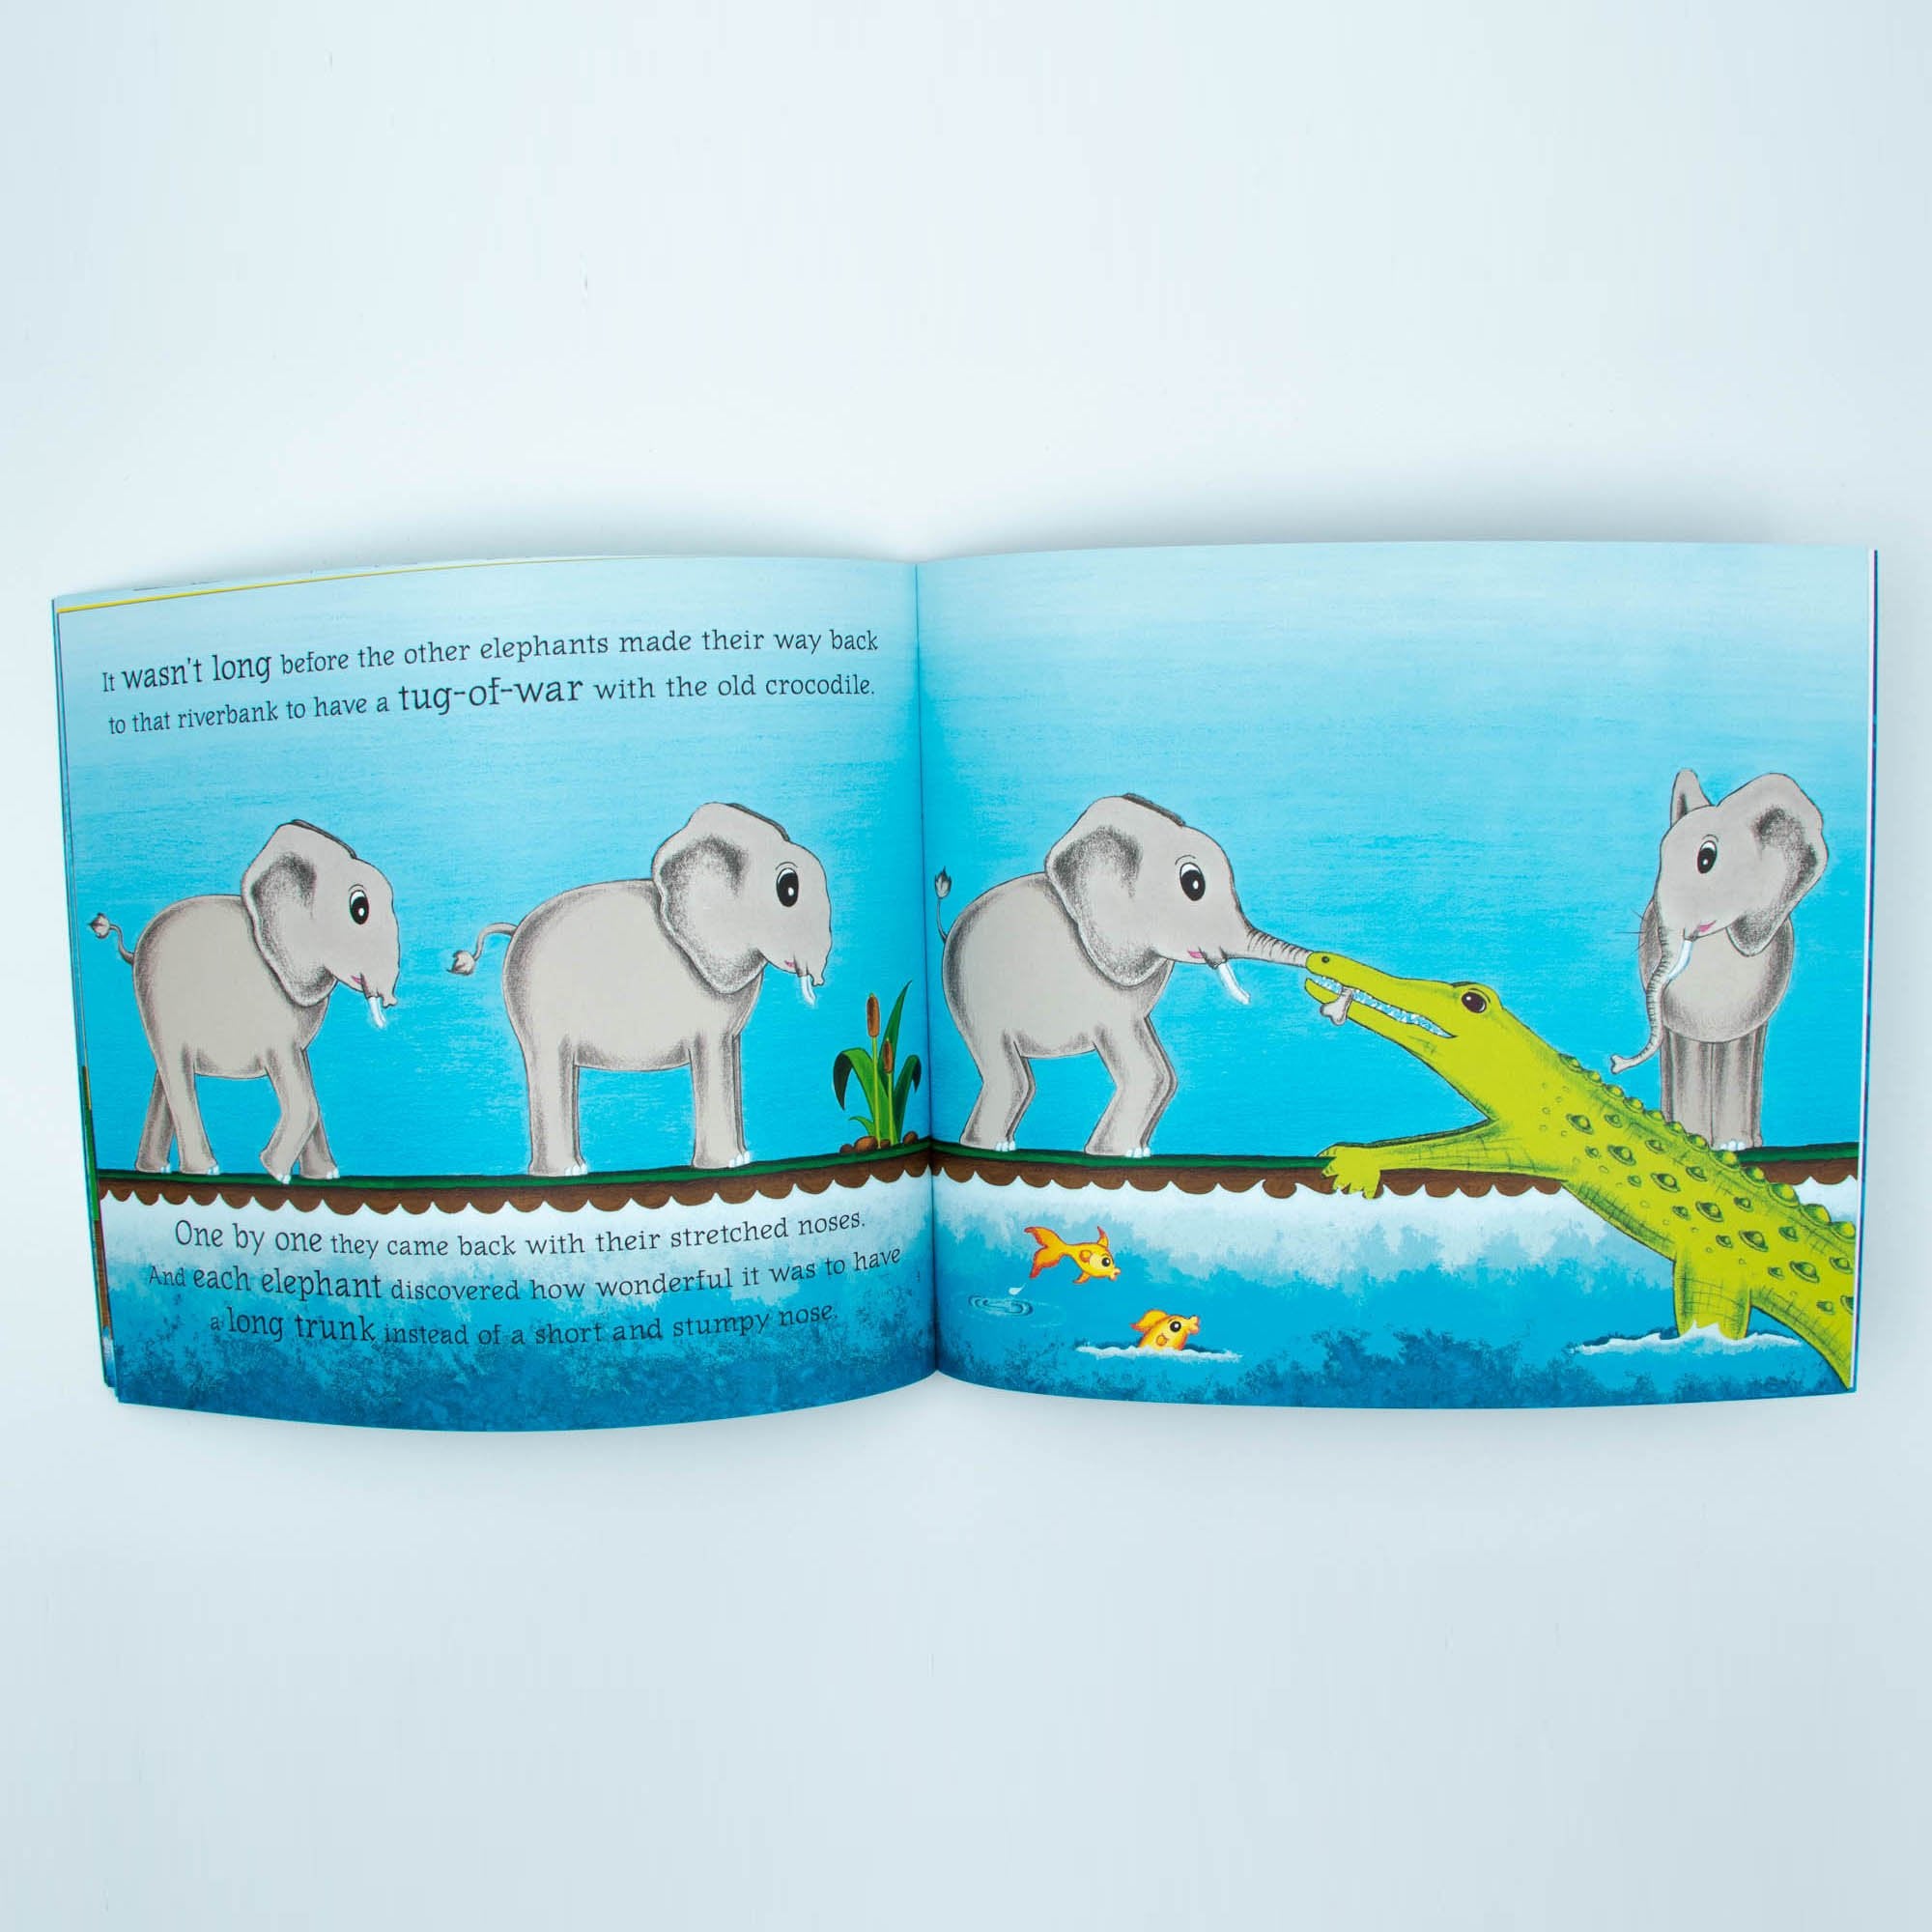 African Folklore Stories How the Elephant got his Trunk English Story Book